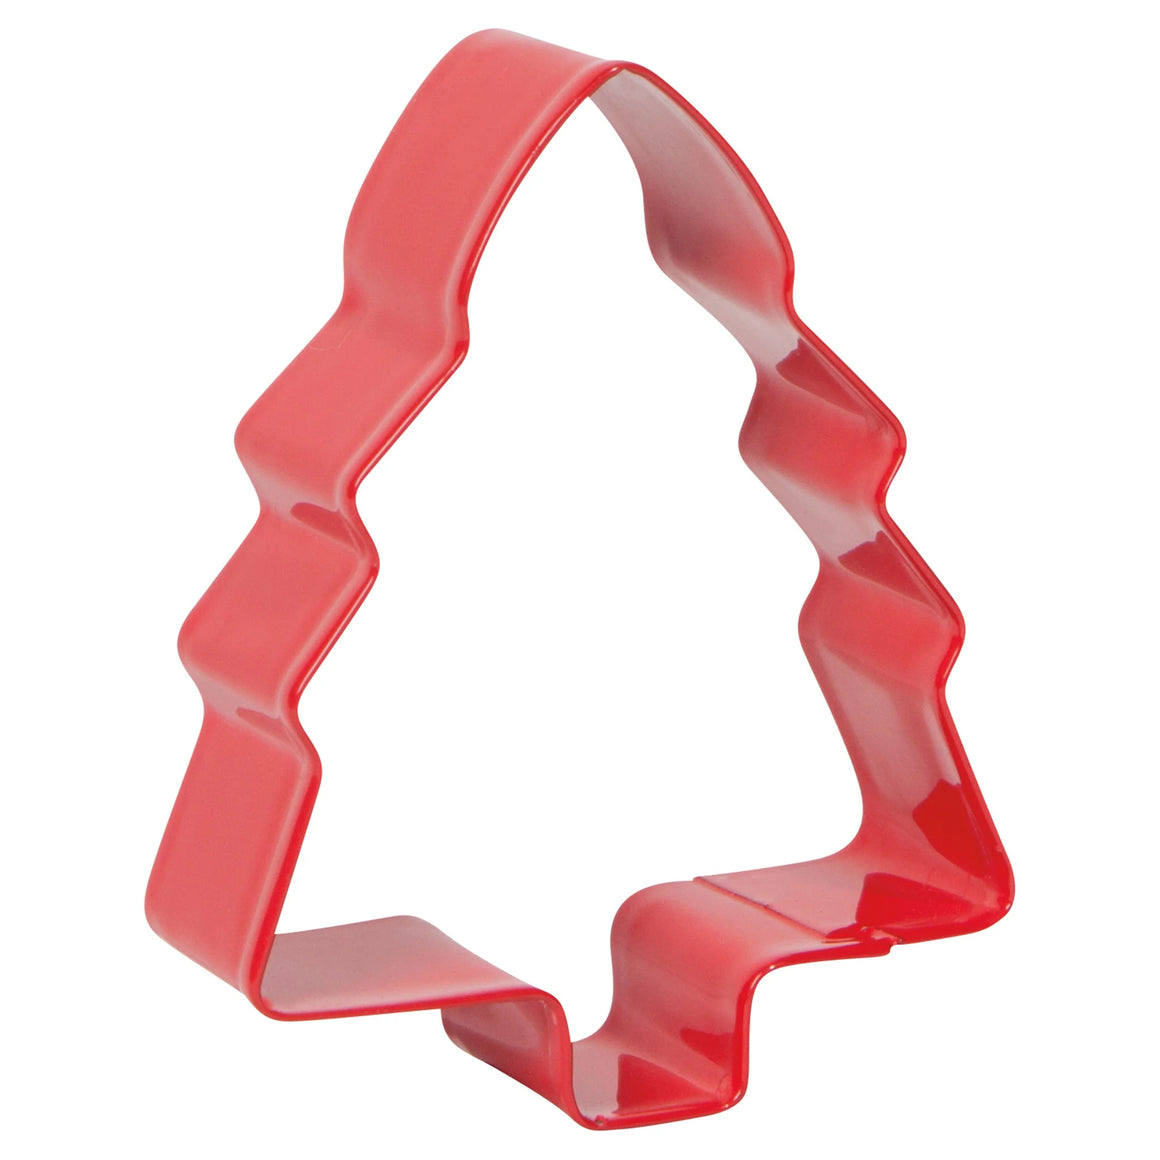 Christmas cookie cutter set of 3